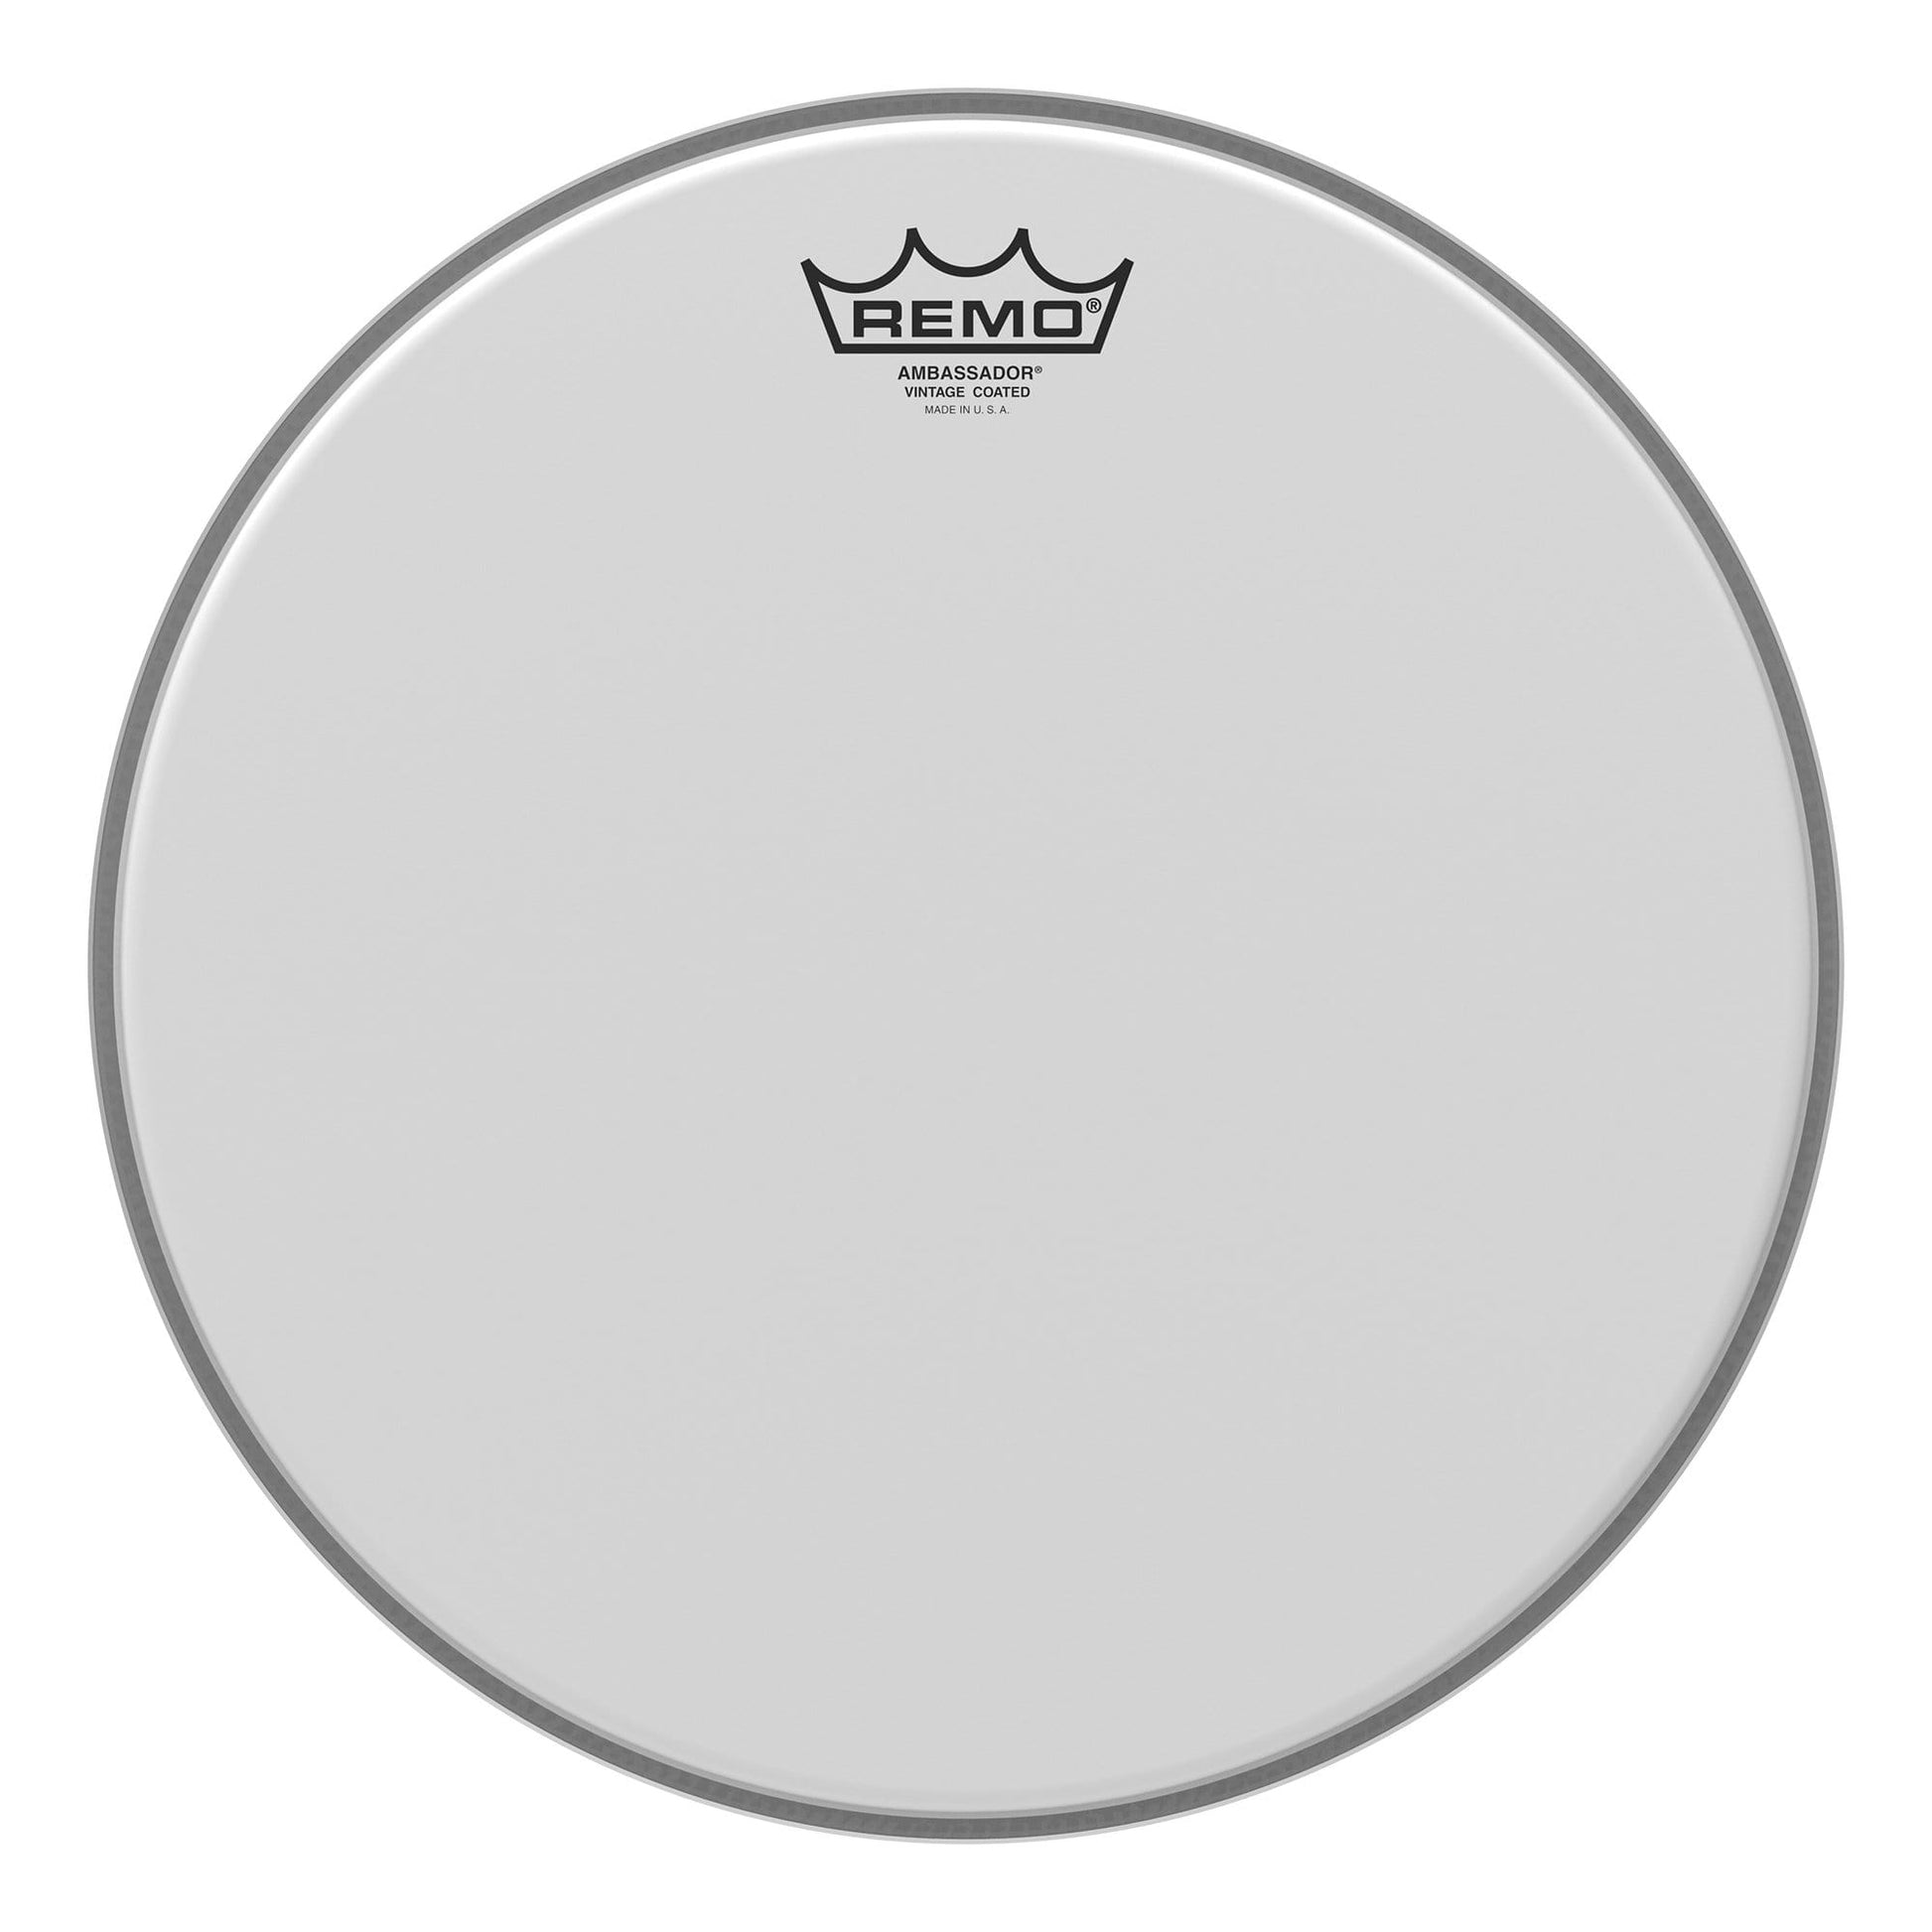 Remo 13" Ambassador Vintage Coated Drumhead Drums and Percussion / Parts and Accessories / Heads